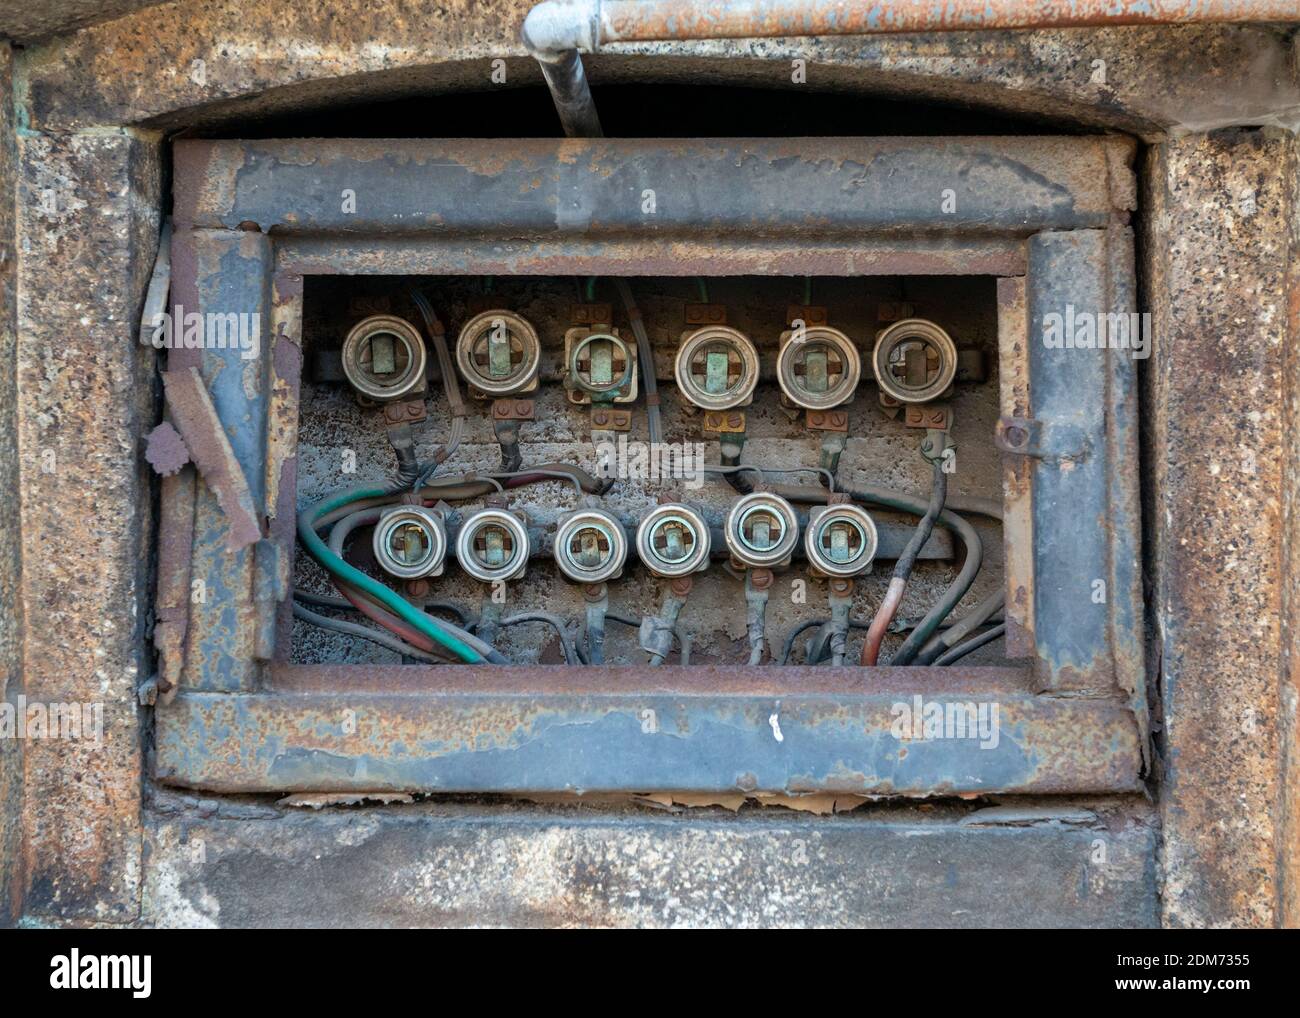 Disused old-fashioned electrical distribution board and old fuses in neglected abandoned building Stock Photo